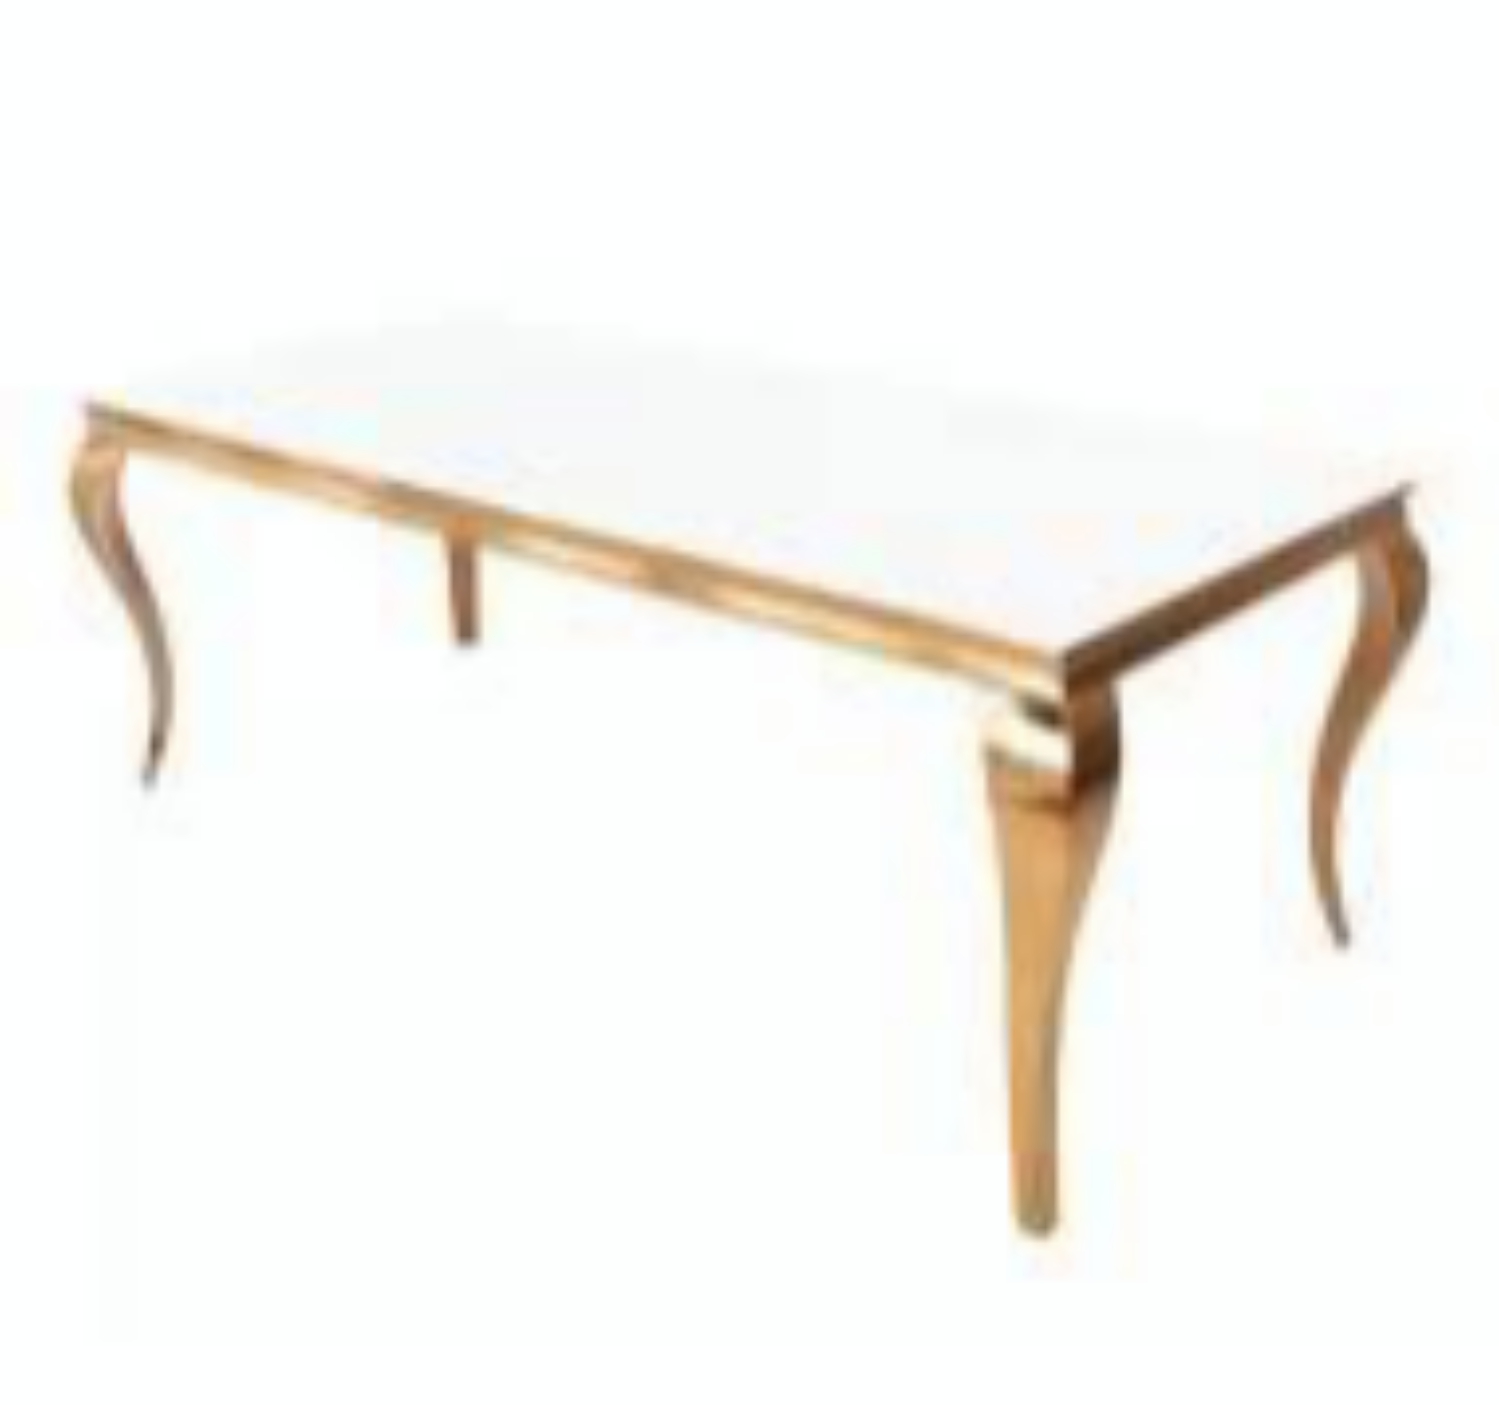 Gold Table with white top 80x48x30 inch # 1145003